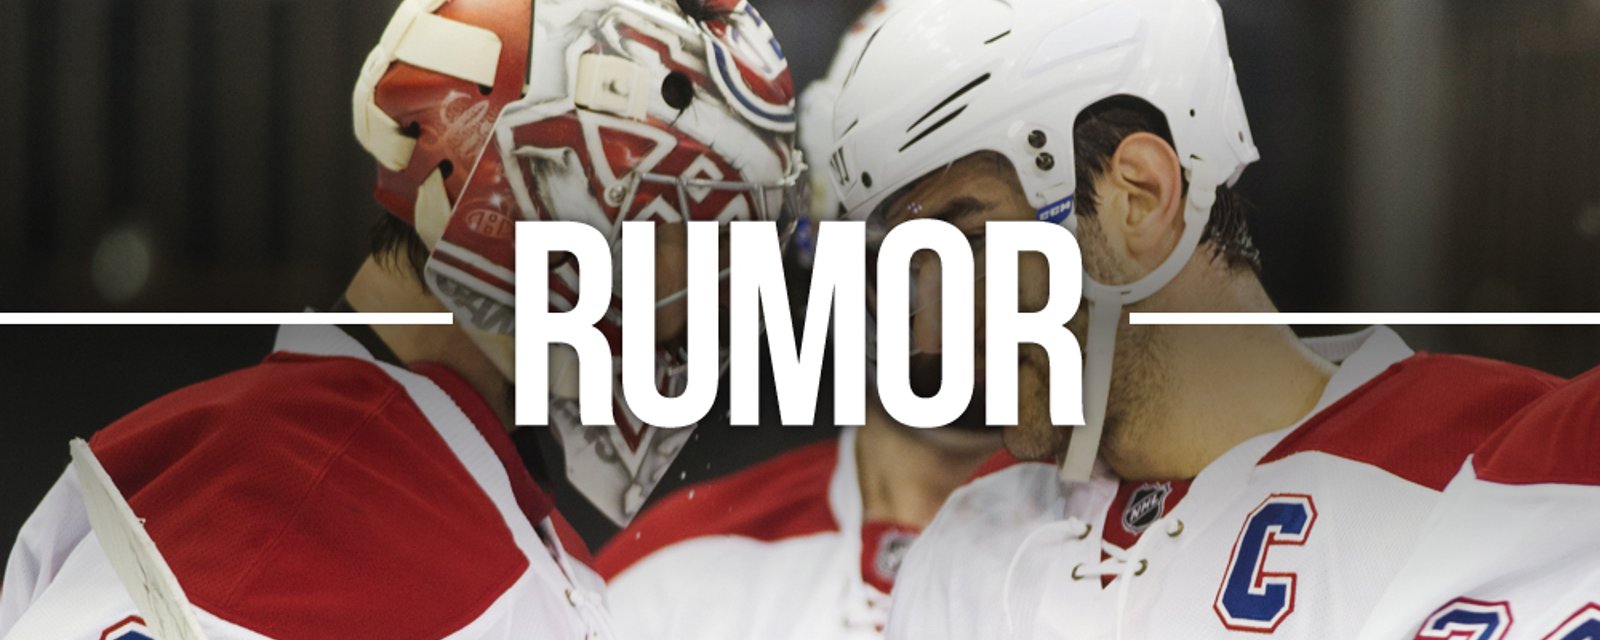 Rumor: 5 superstars that could be traded by July 1st according to NHL insiders.